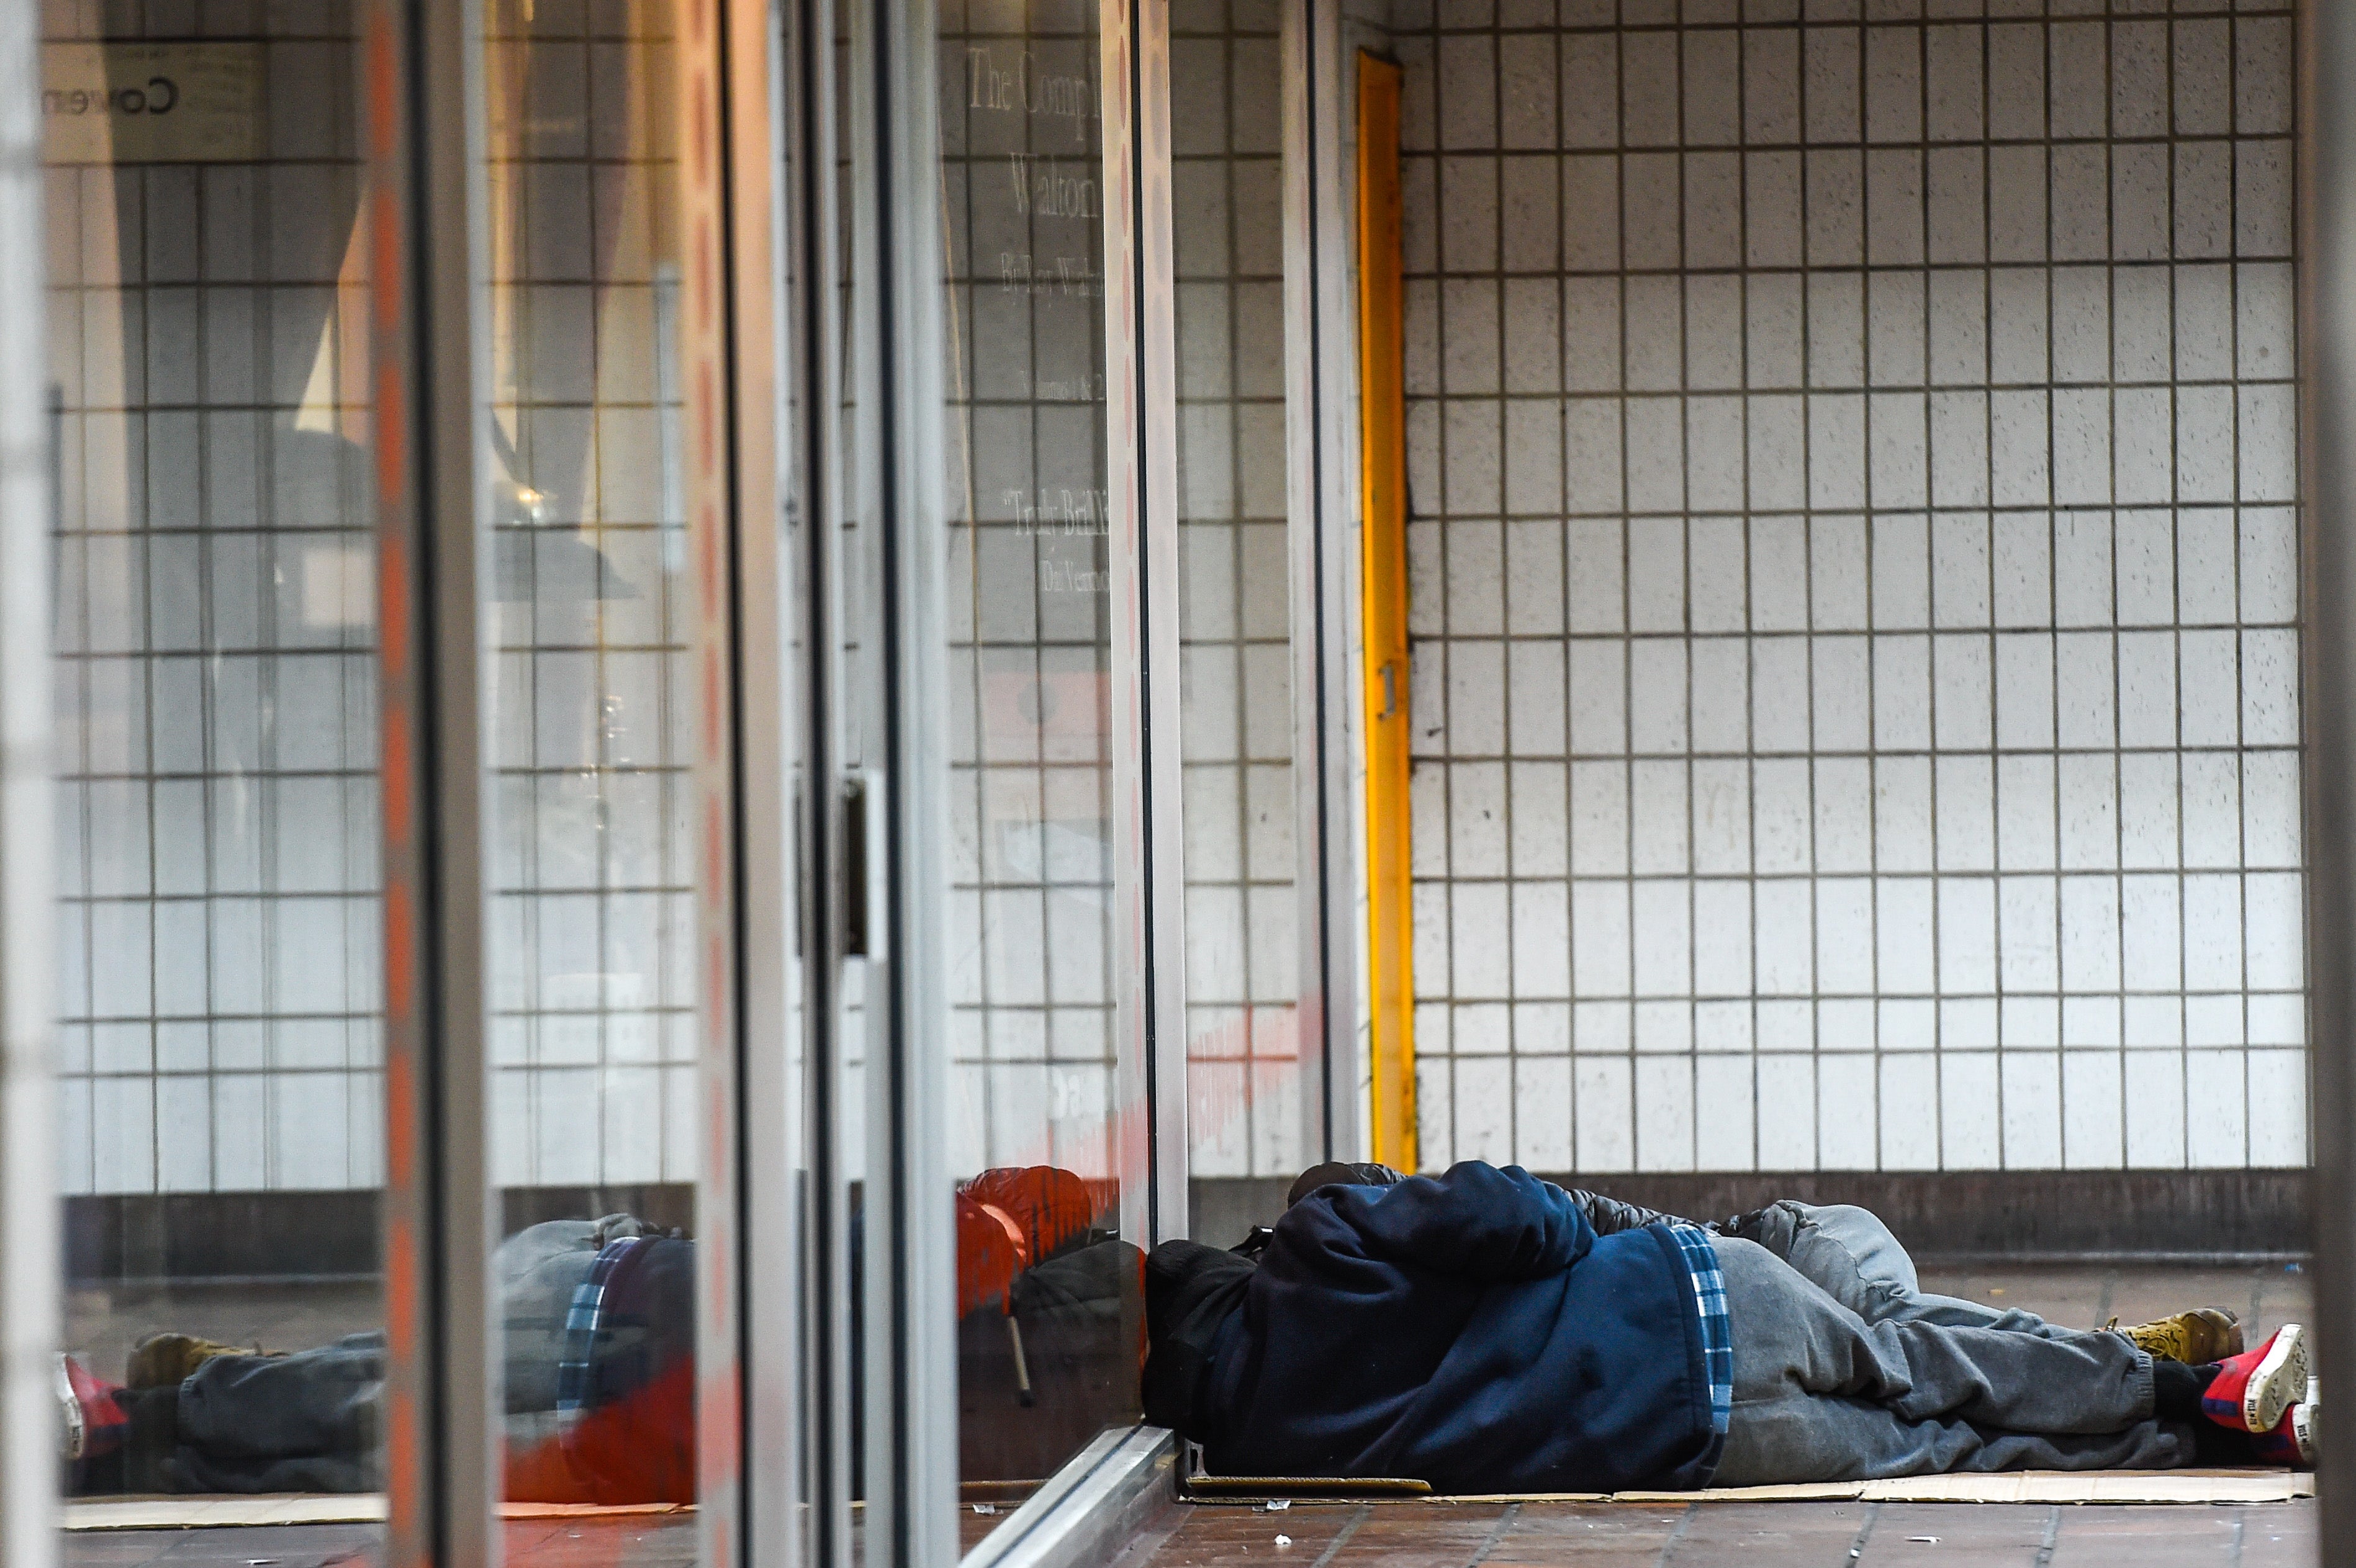 Concern is mounting for the thousands of people who are thought to have fallen homeless since the pandemic started